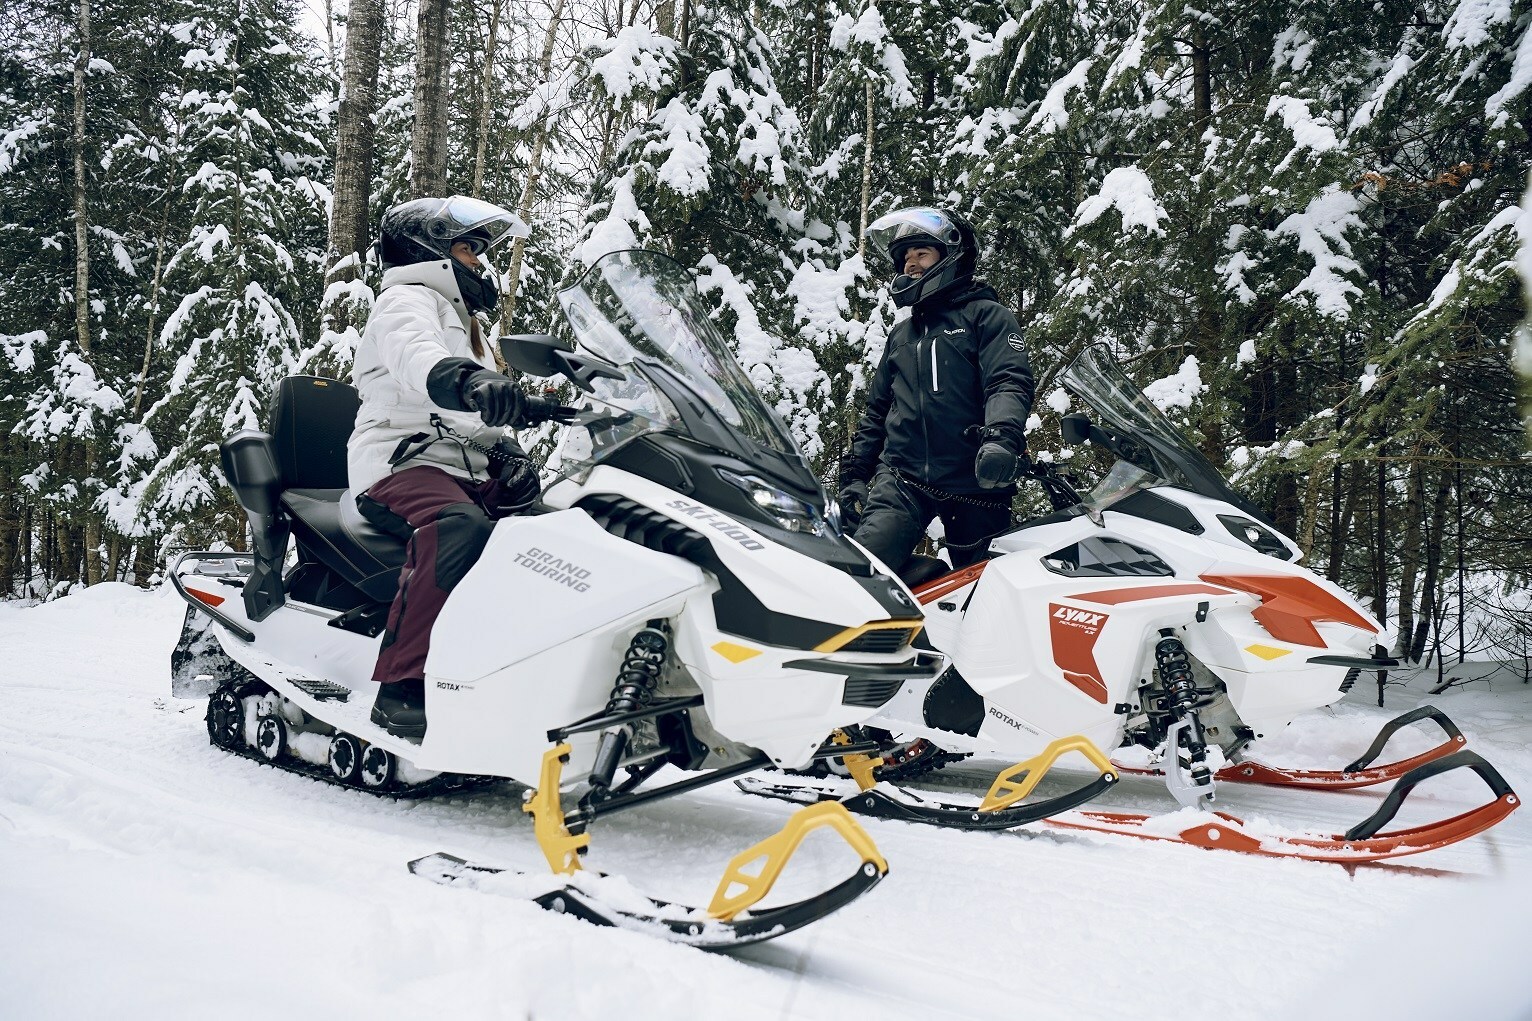 Ski-Doo and Lynx launch first ever electric snowmobiles